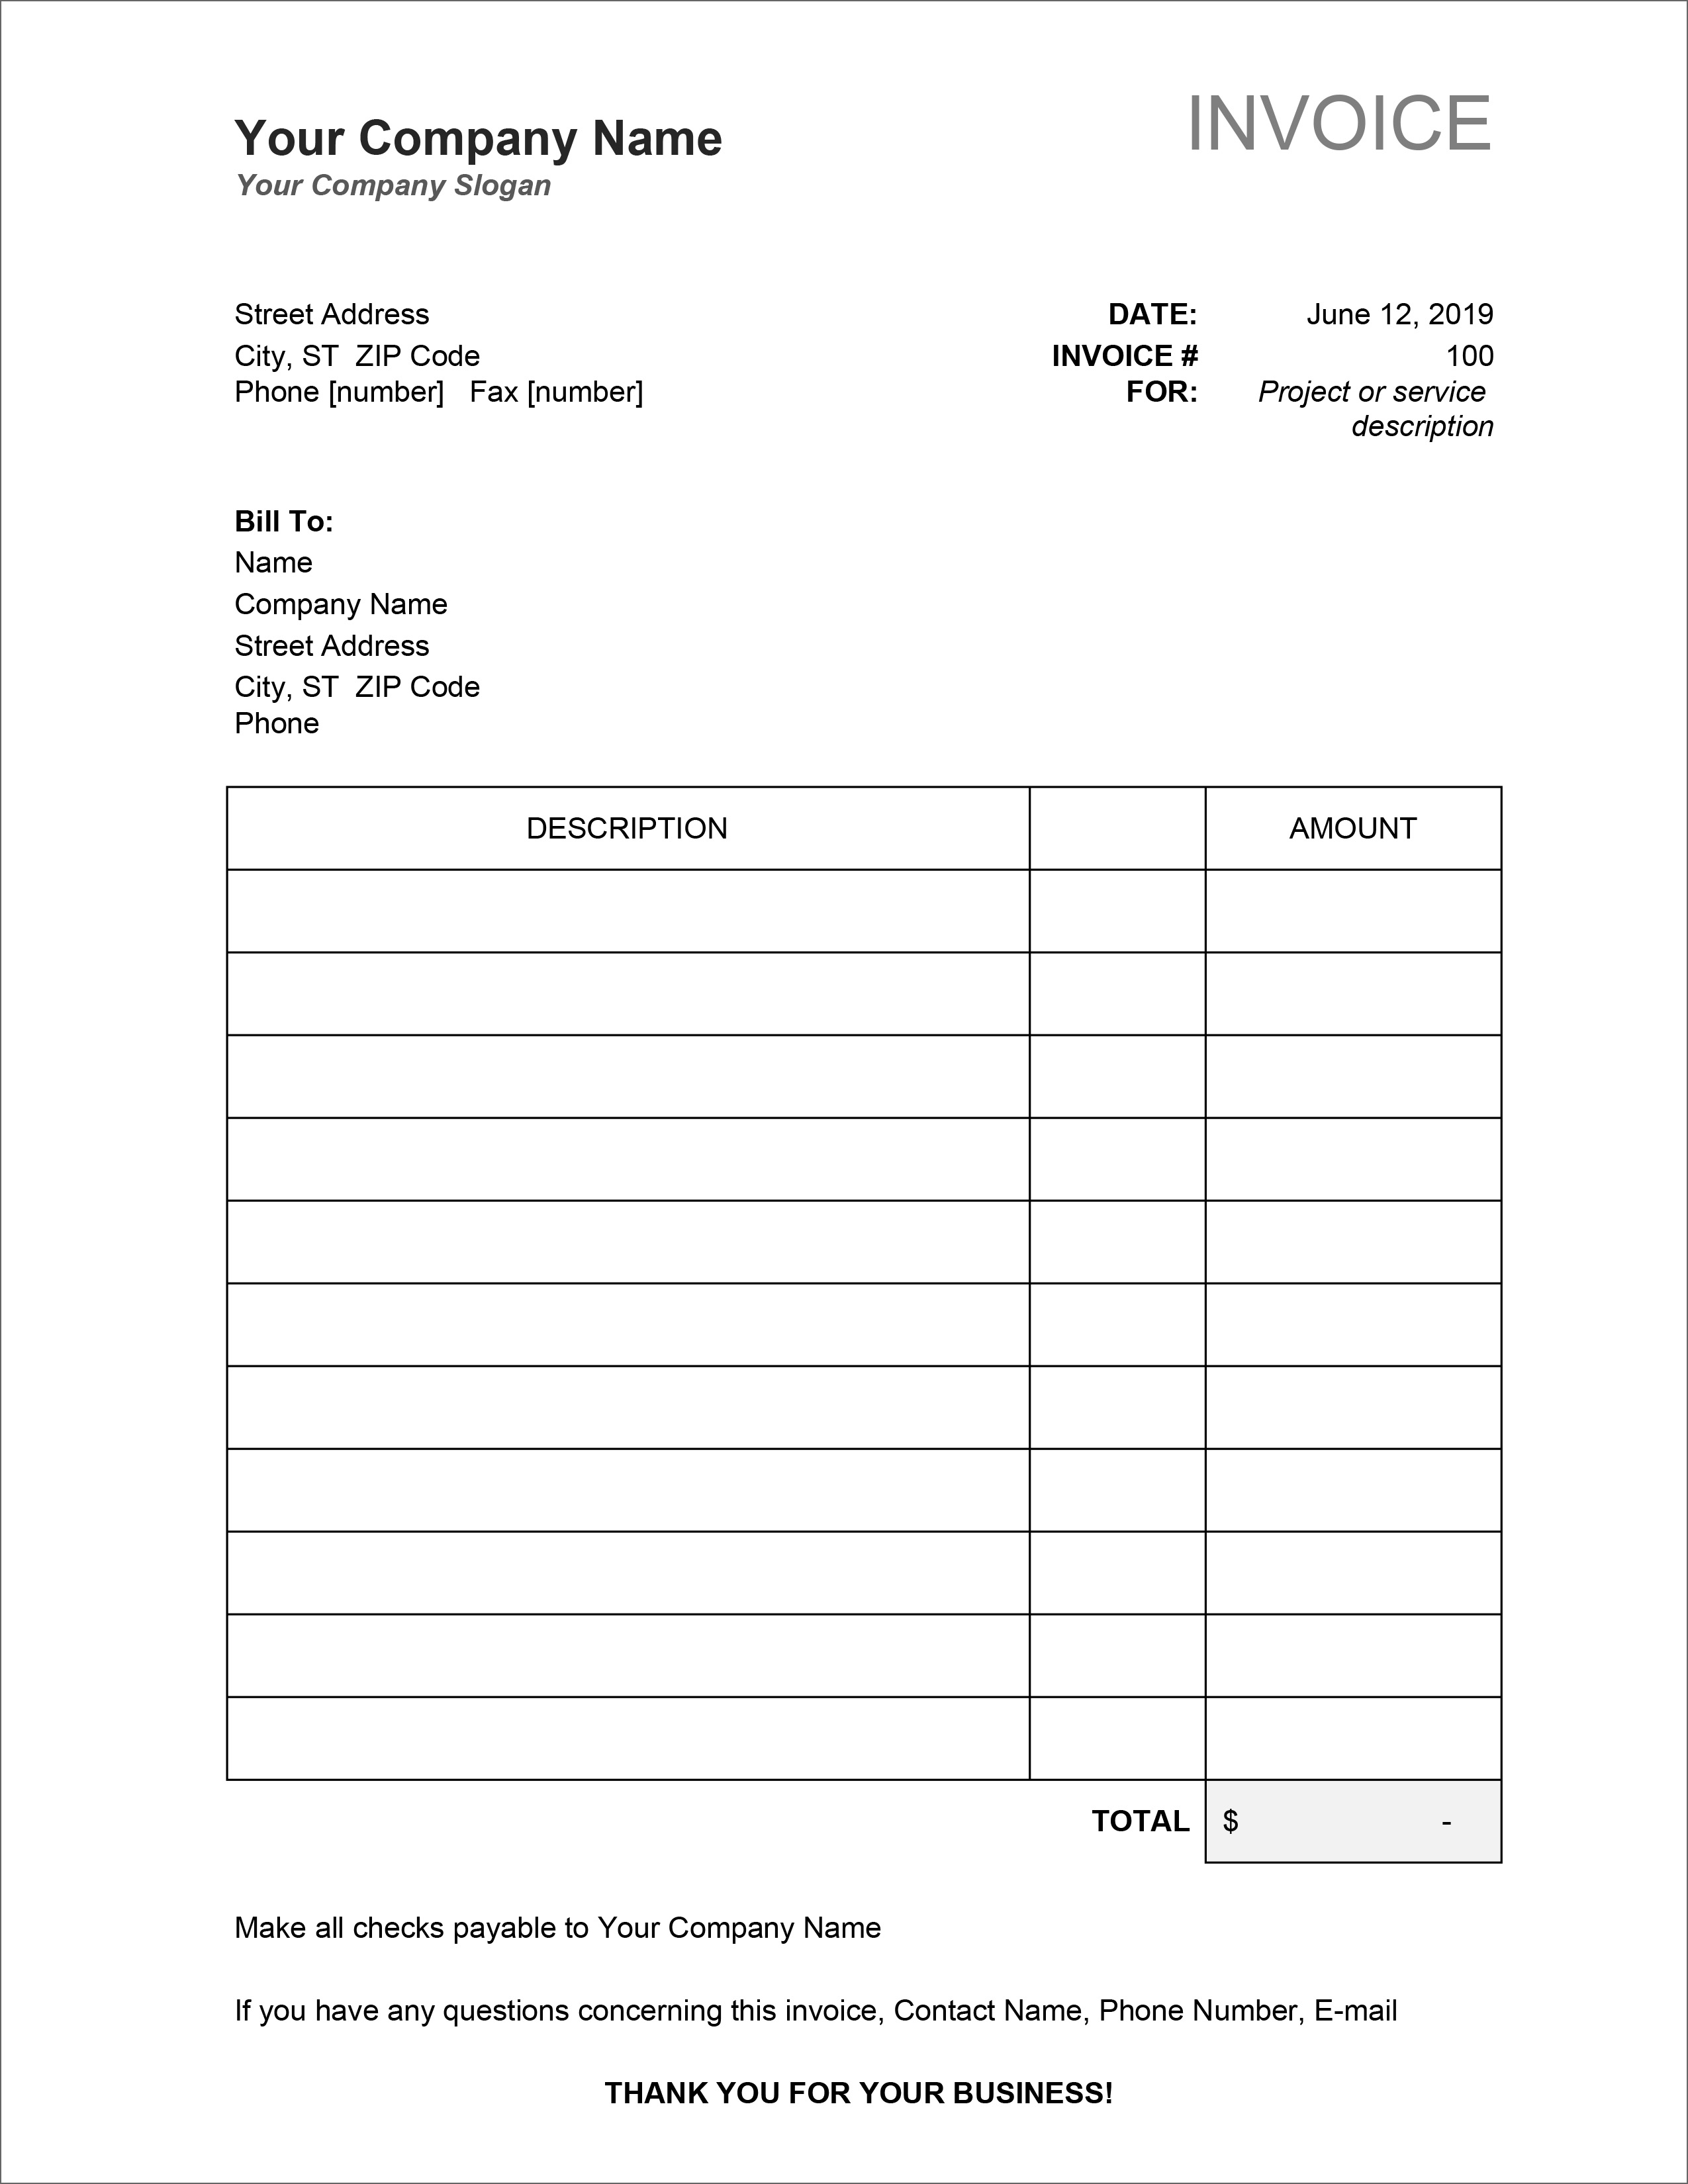 Basic Invoice Template Download Free from cdn.geckoandfly.com